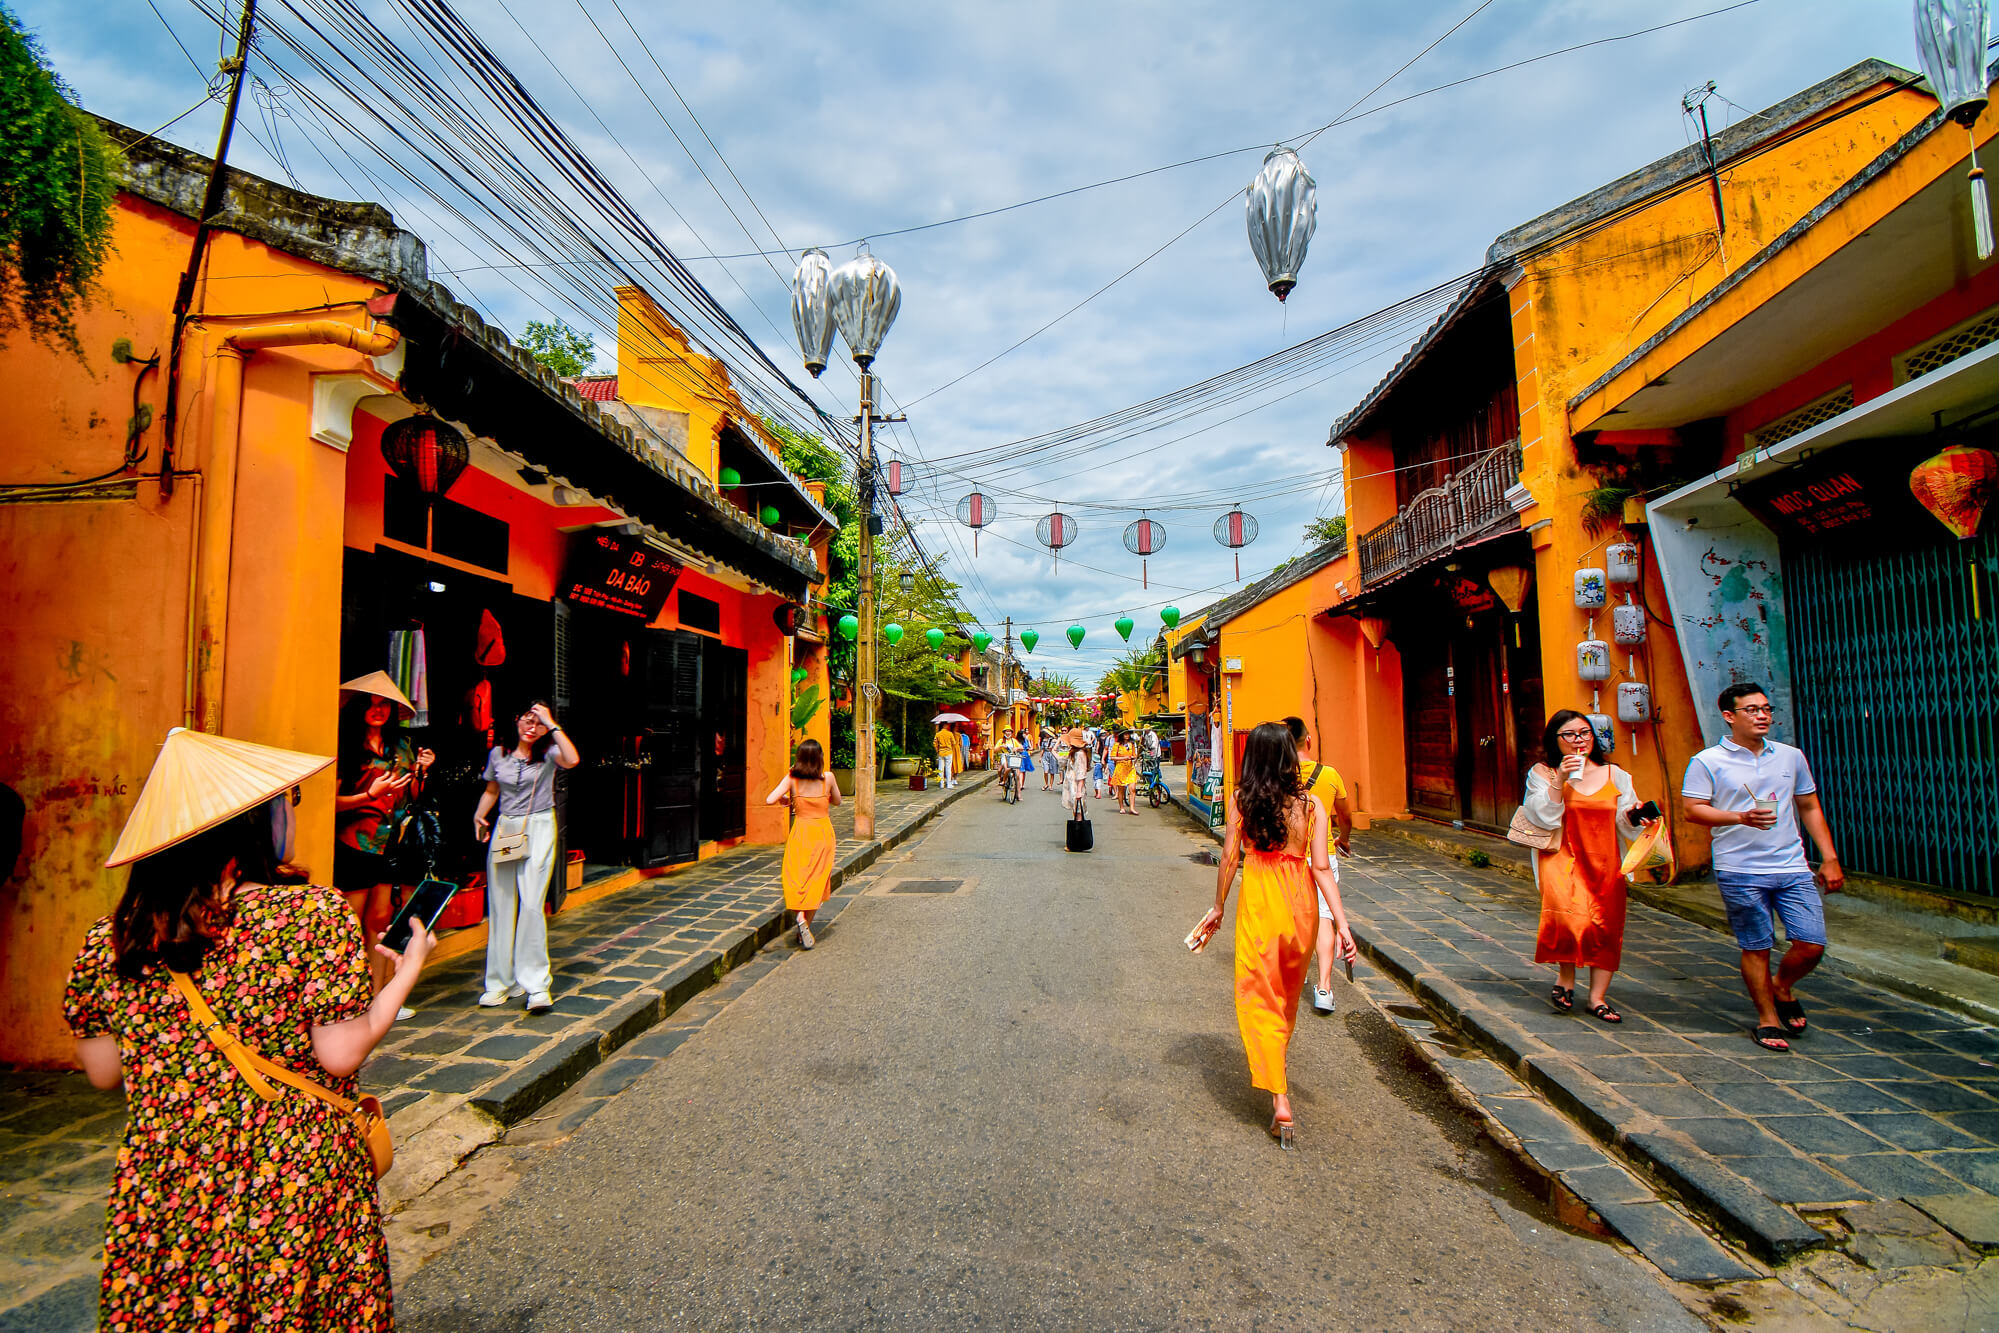 Experience slow pace of life in Hoi An